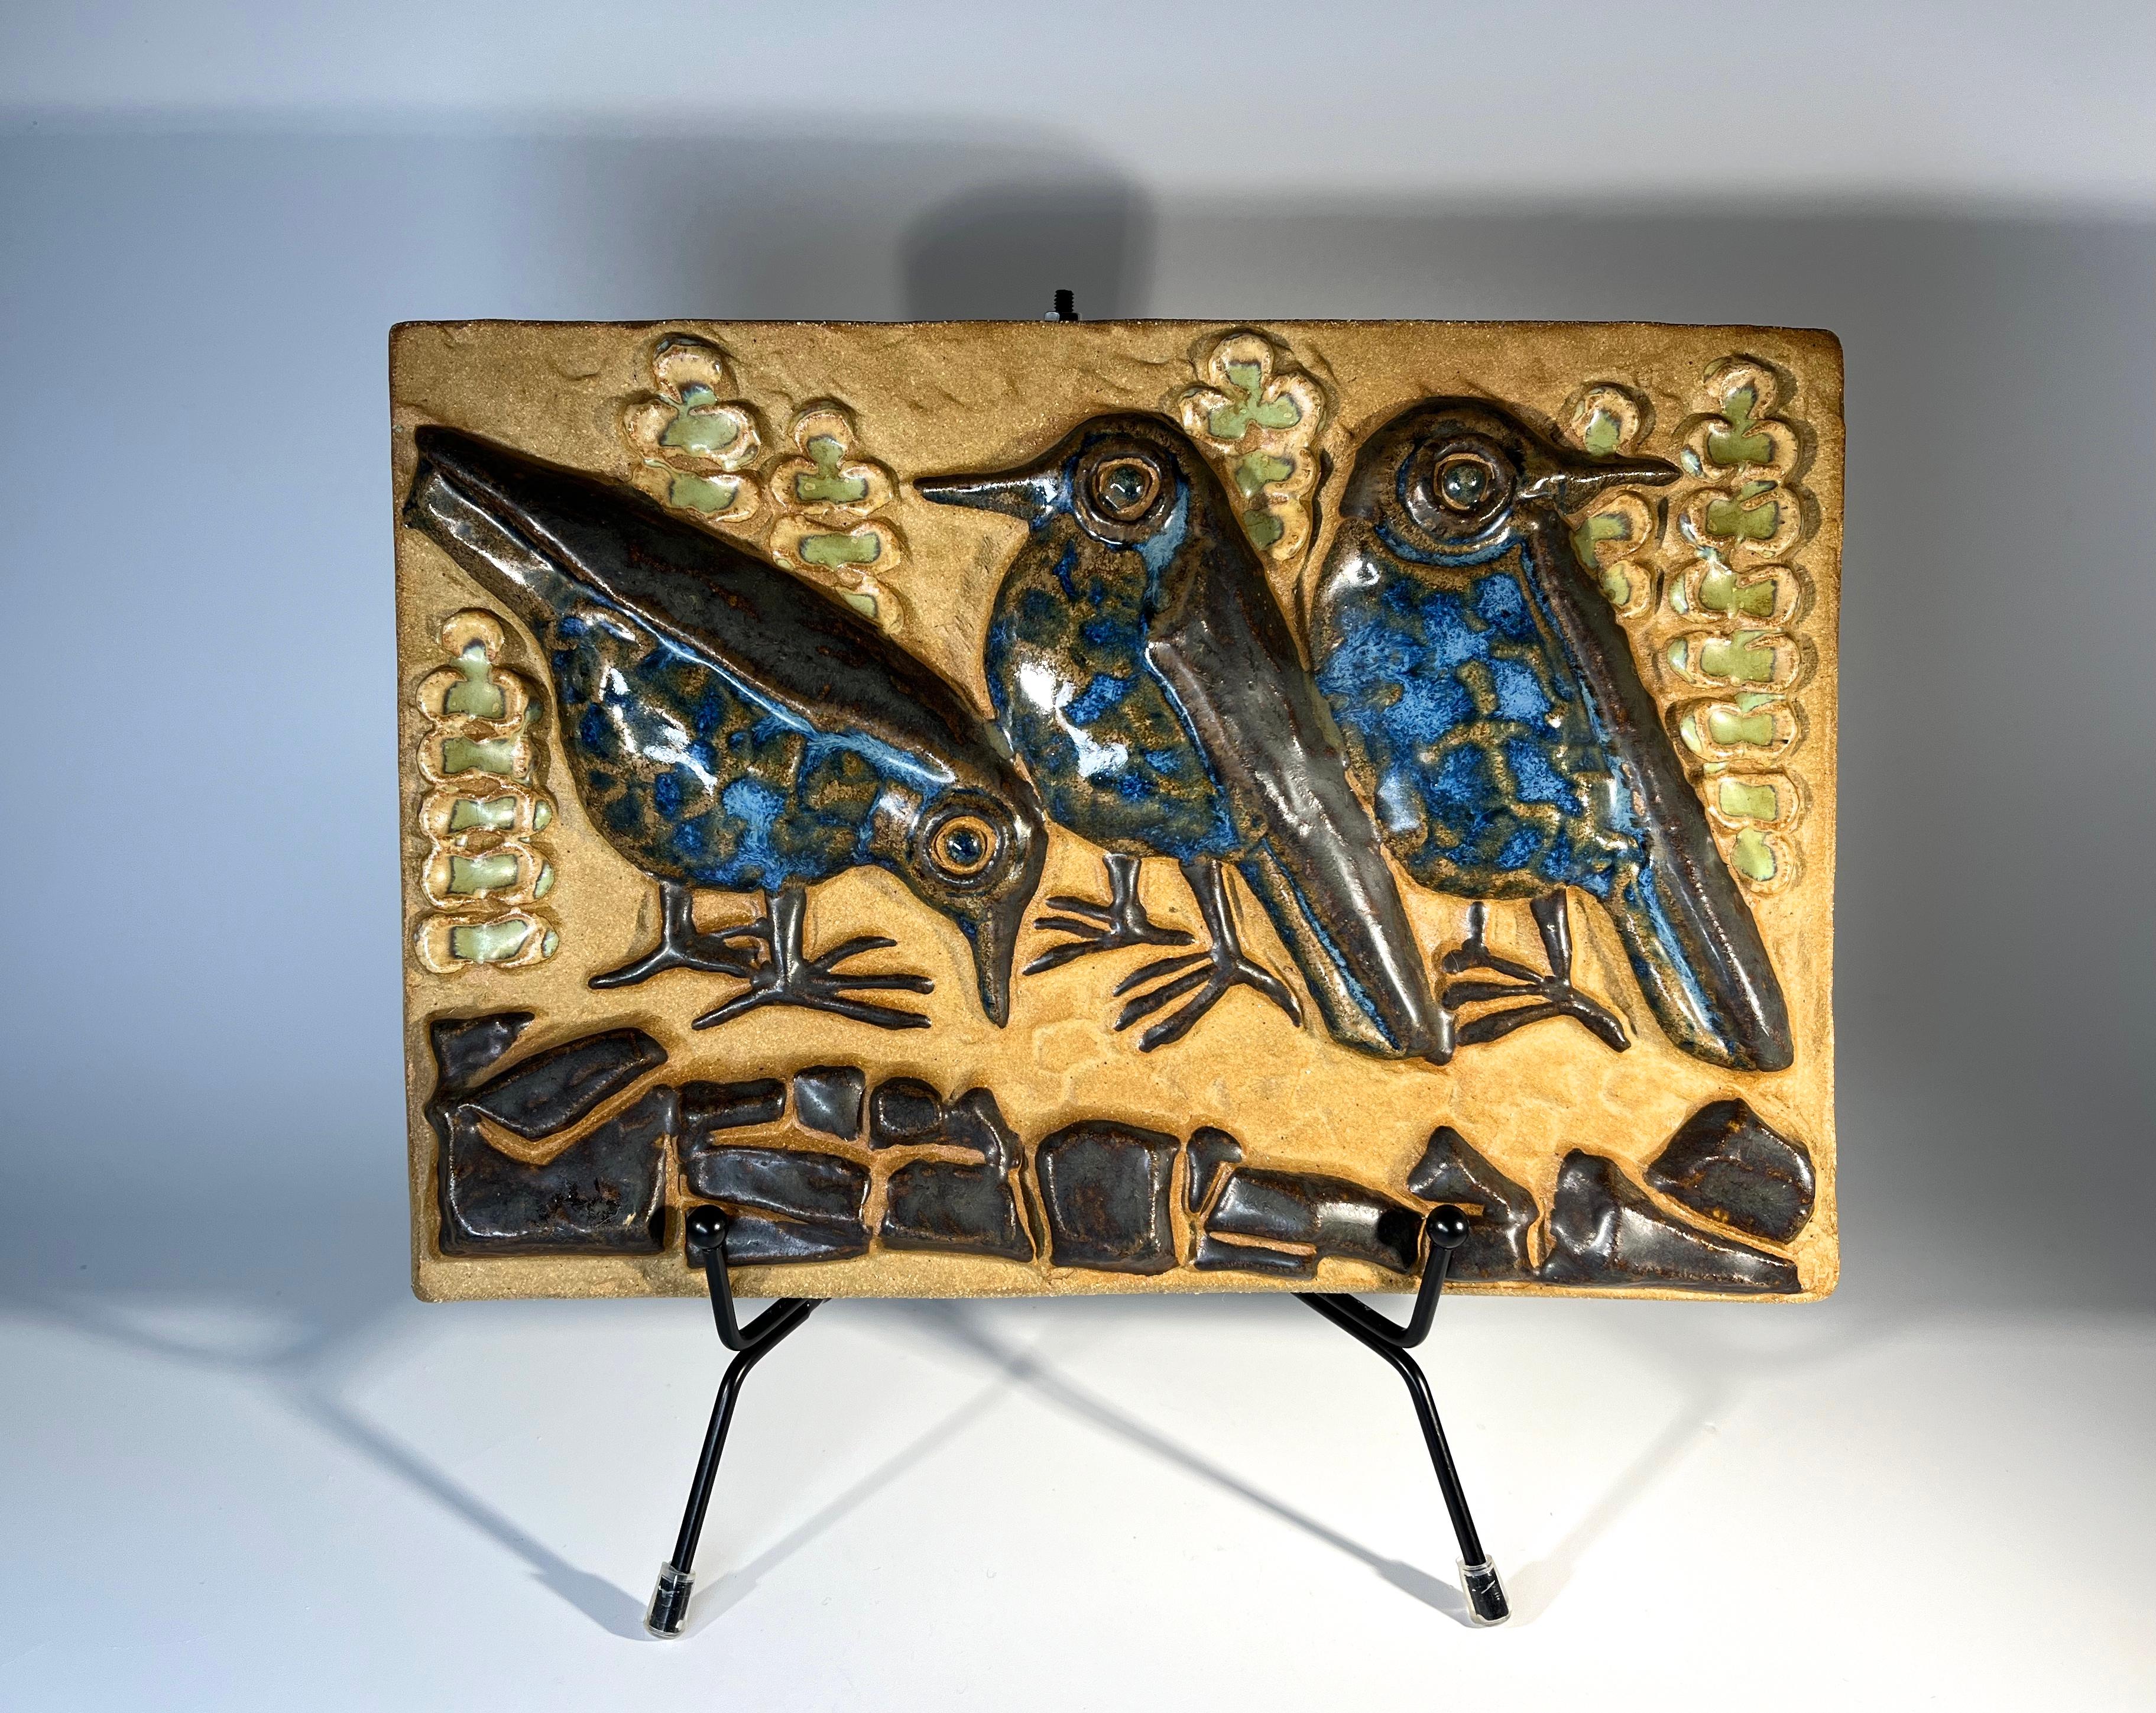 Trio of birds wall plaque, by Marianne Starck for Michael Andersen, Denmark 
Amusing trio glazed with blue, green and brown over stoneware
Stamped MS, Three Herrings mark and #6267 on reverse
Width 9.5 inch, Height 6.5 inch, Depth 1 inch
Weight 3lb